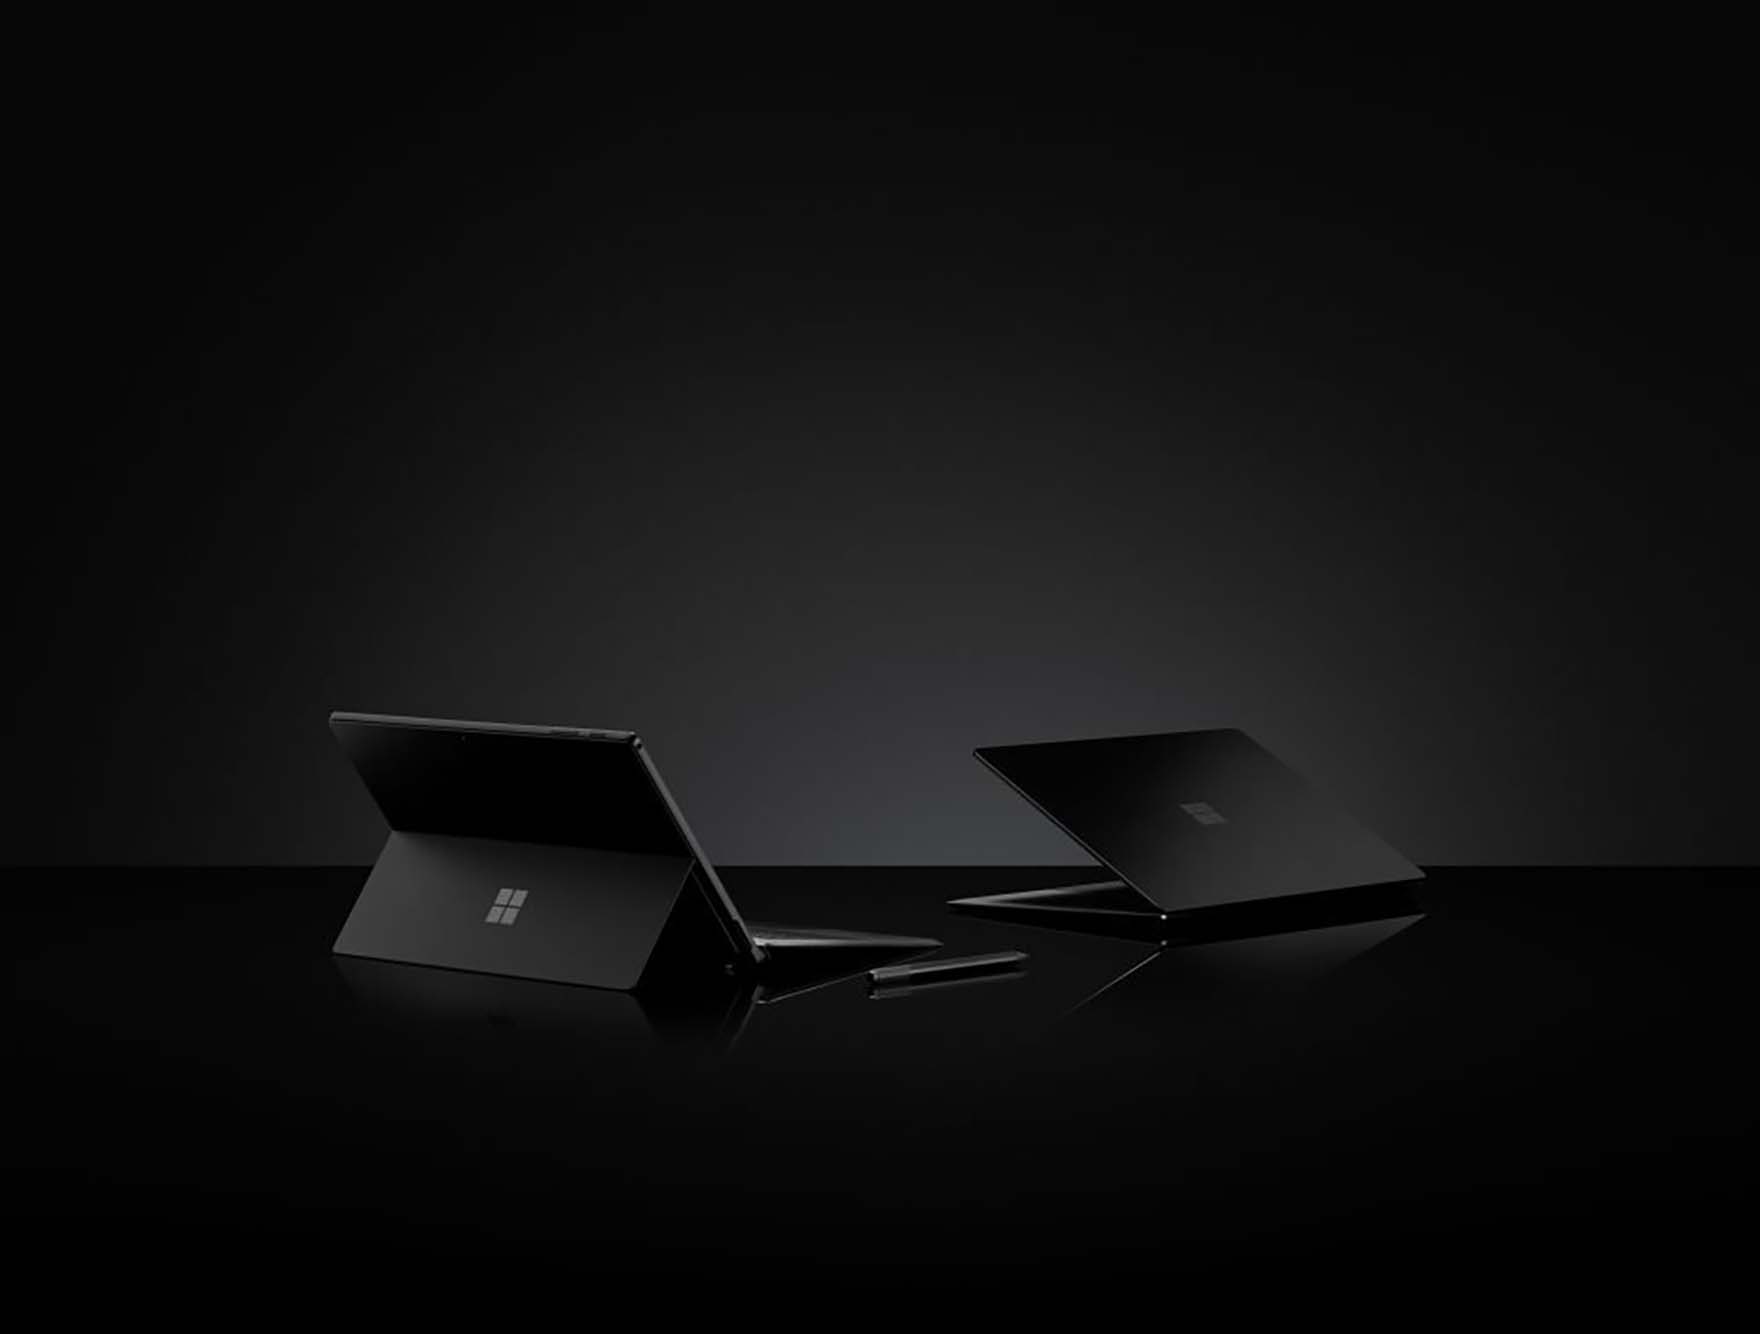 Surface devices